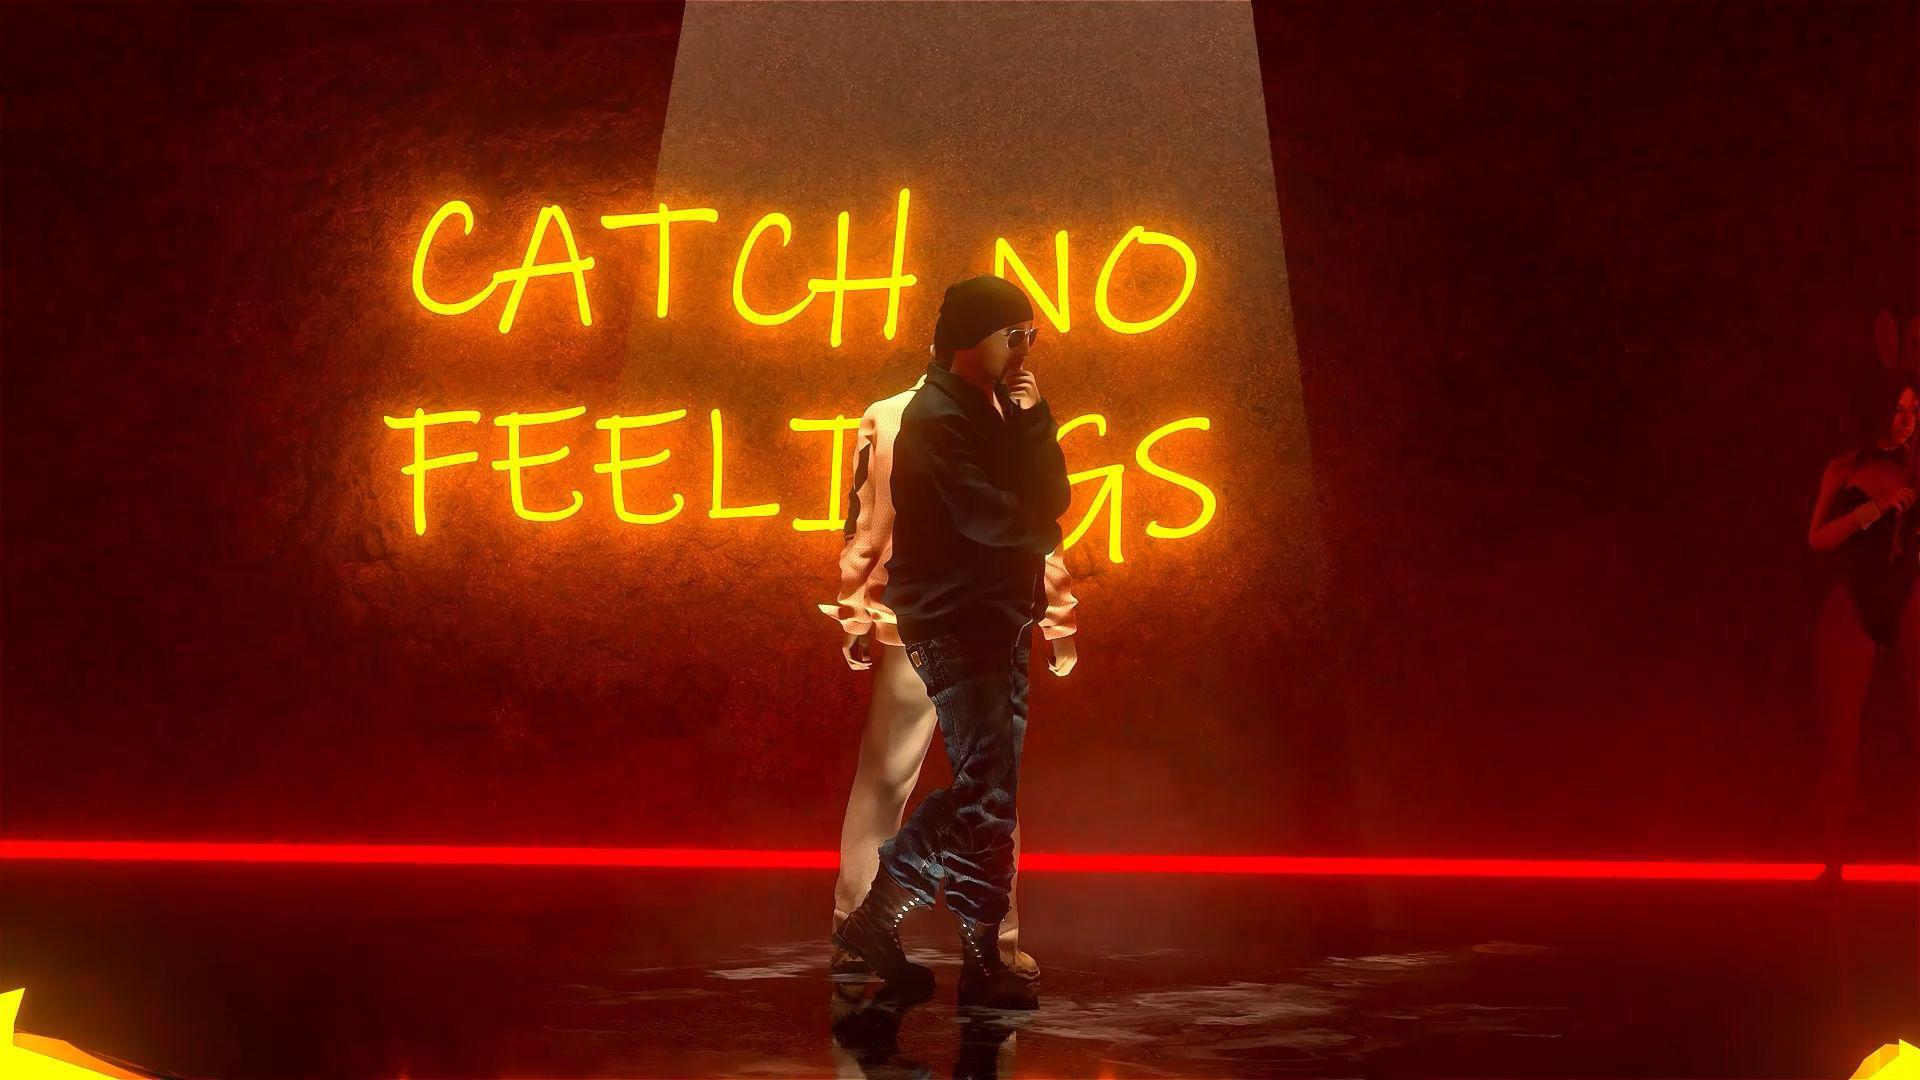 D4 Music - Catch No Feelings 官方 Visualizer